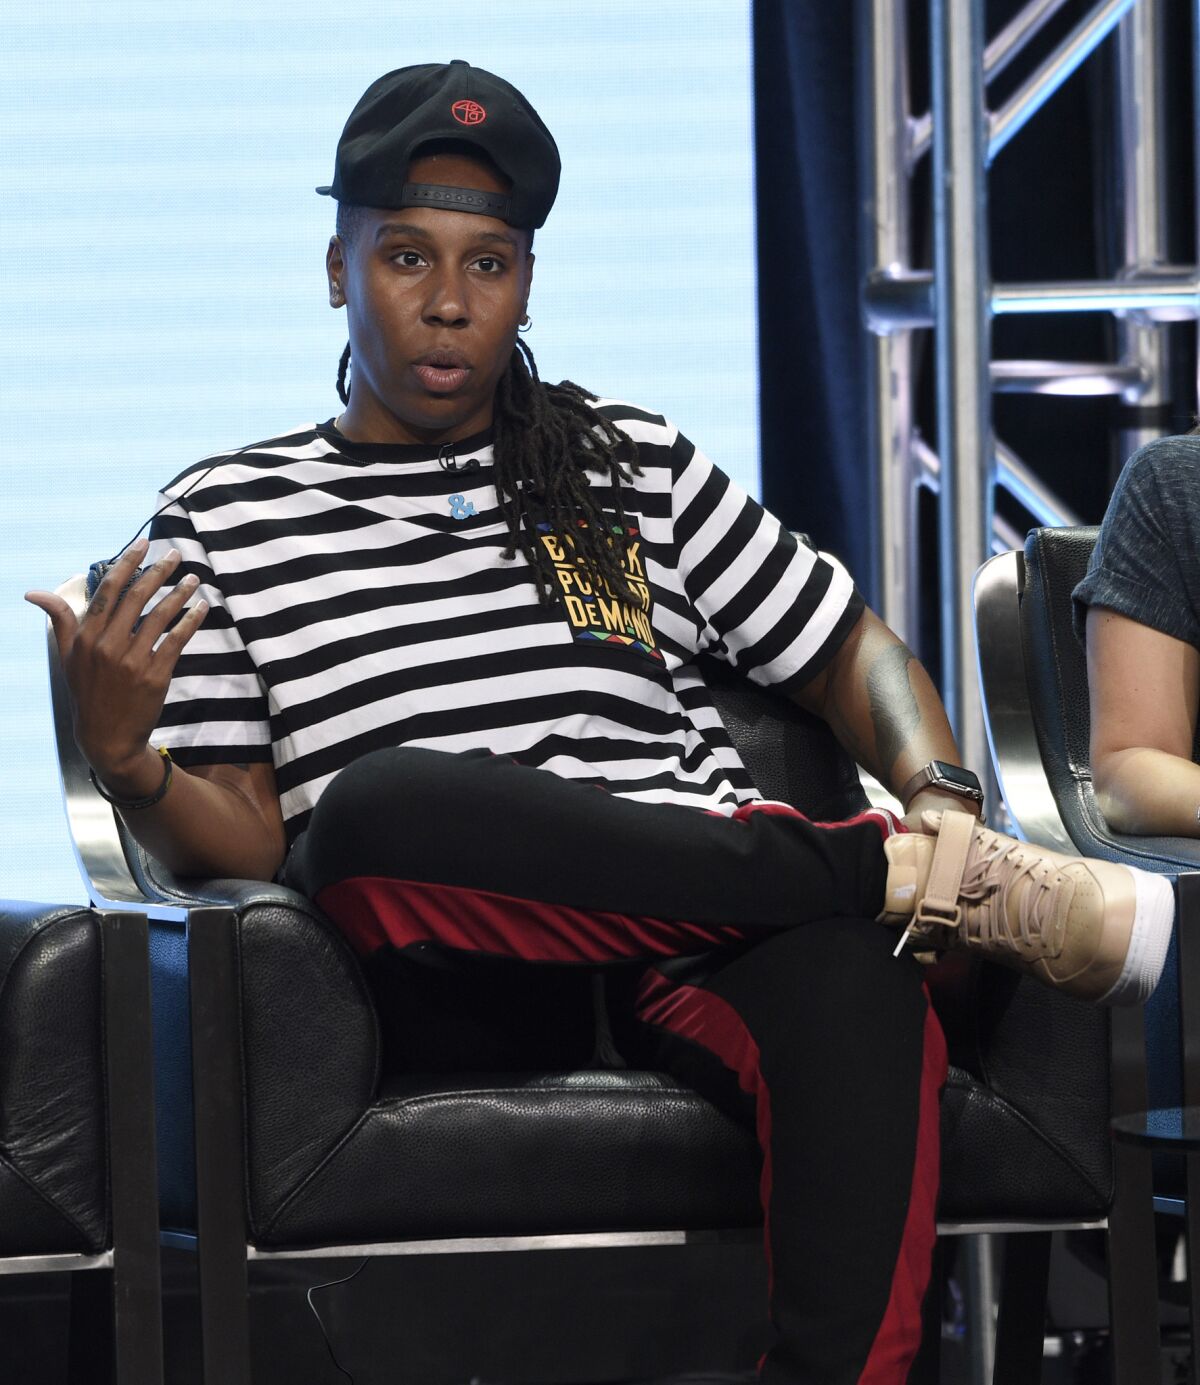 Lena Waithe wrote the screenplay for "Queen and Slim."